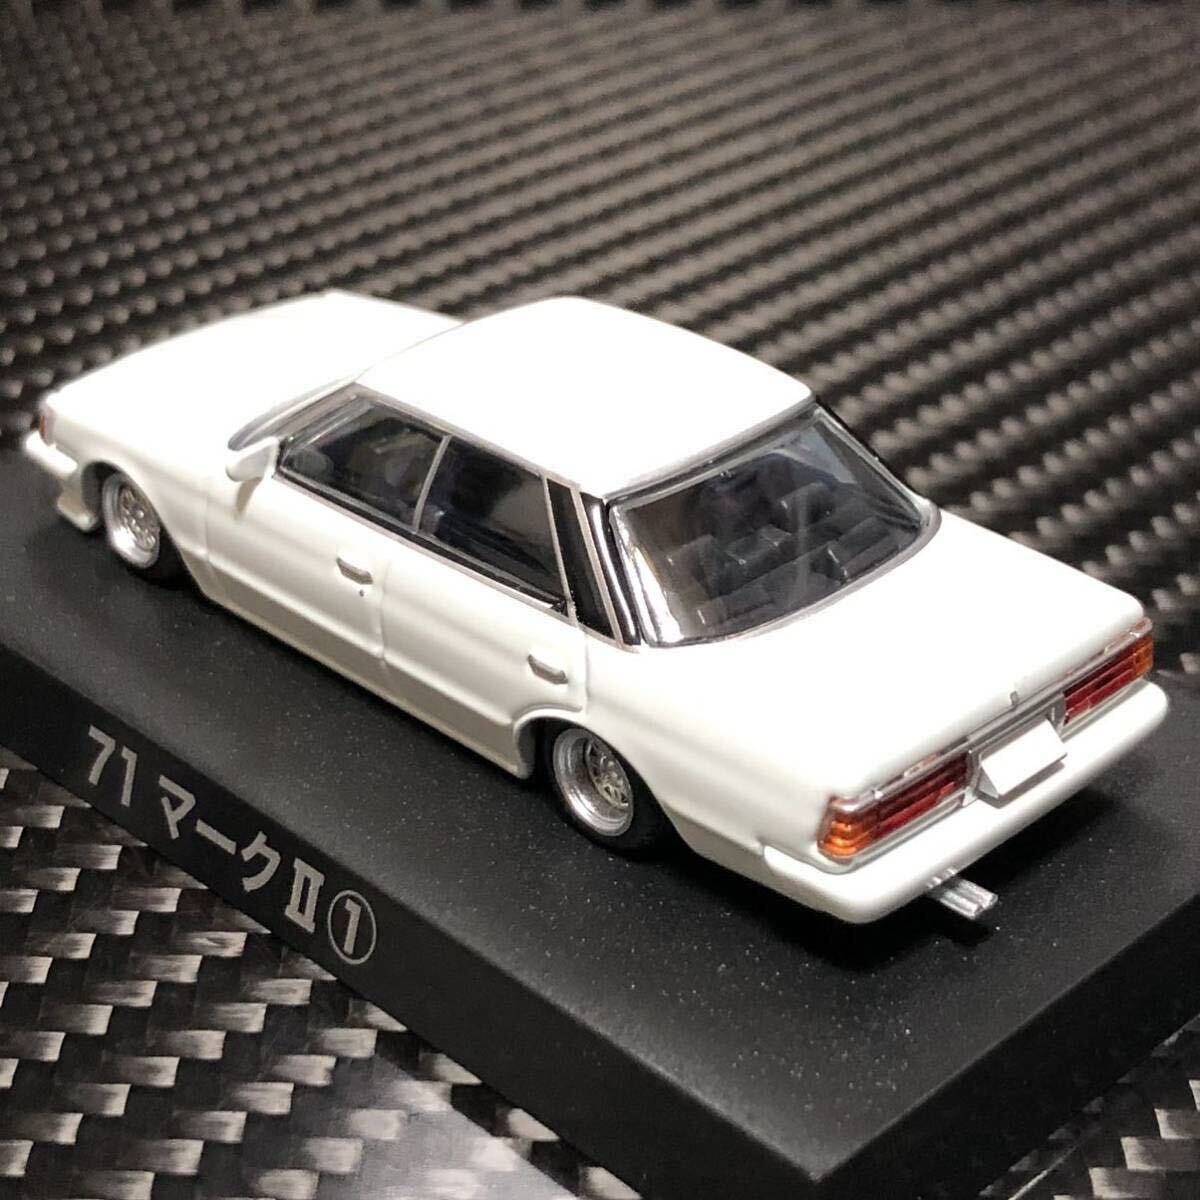 1/64gla tea n collection no. 15.71 Mark Ⅱ ① Blister unopened prompt decision equipped 1987 year GX71 vehicle height short 